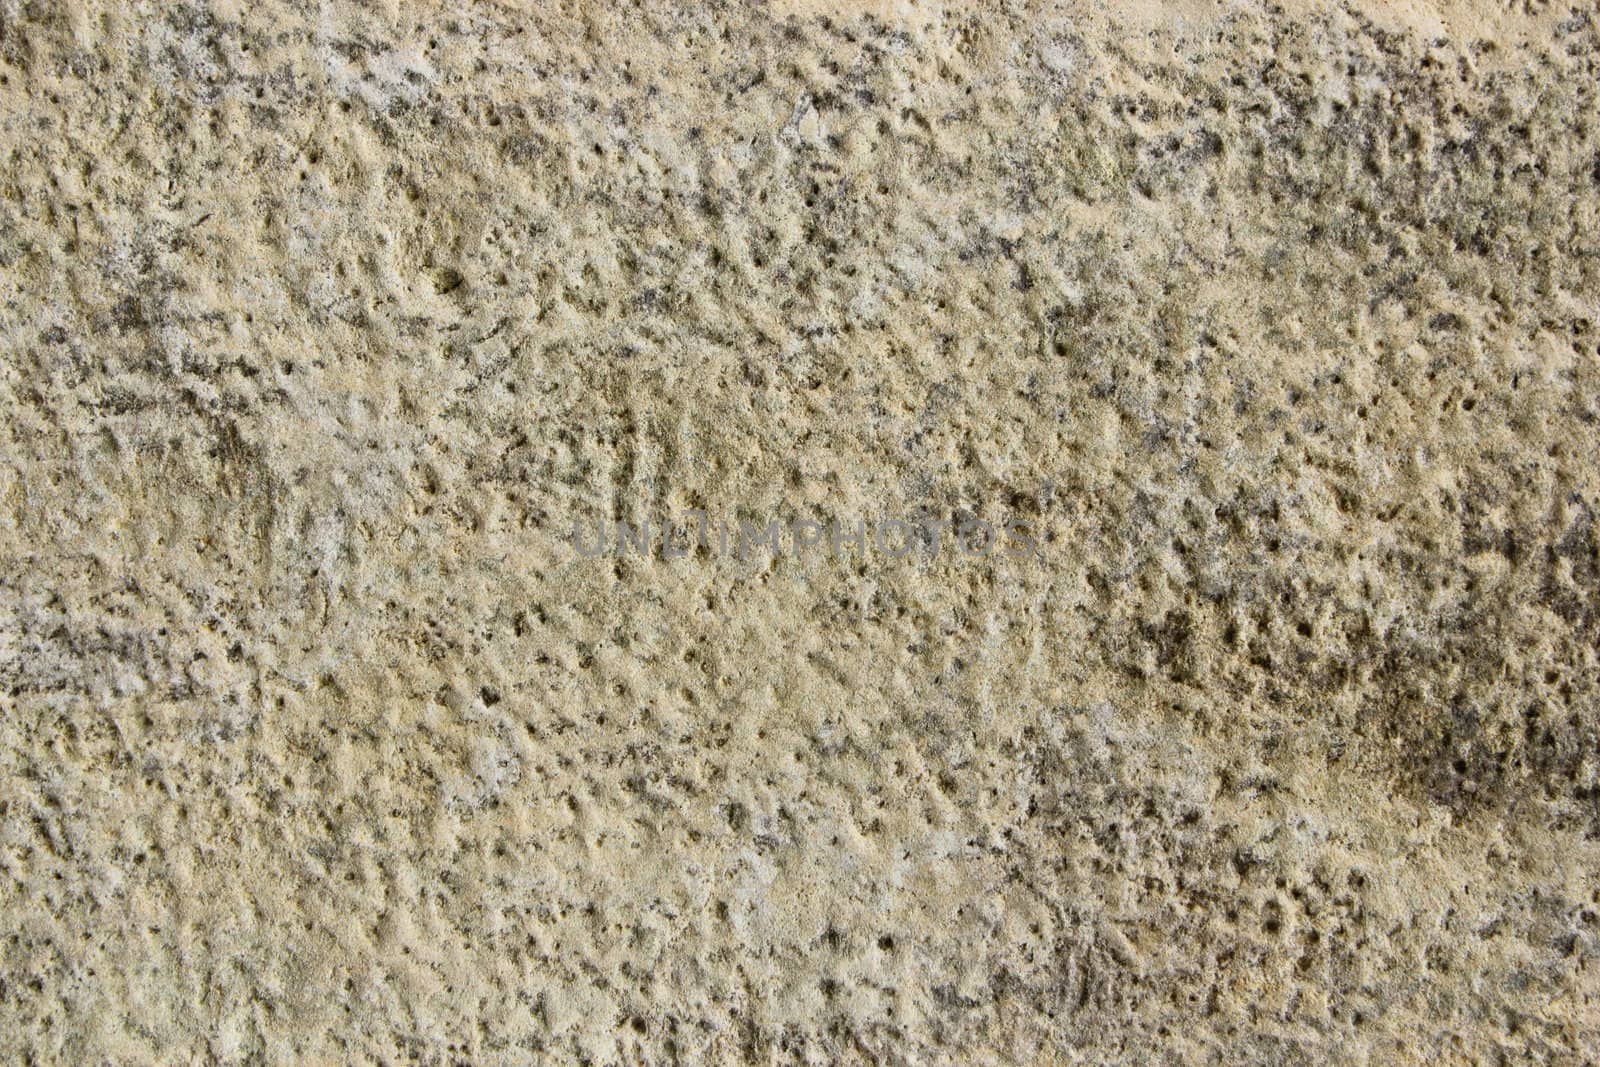 textured detail of a gravestone